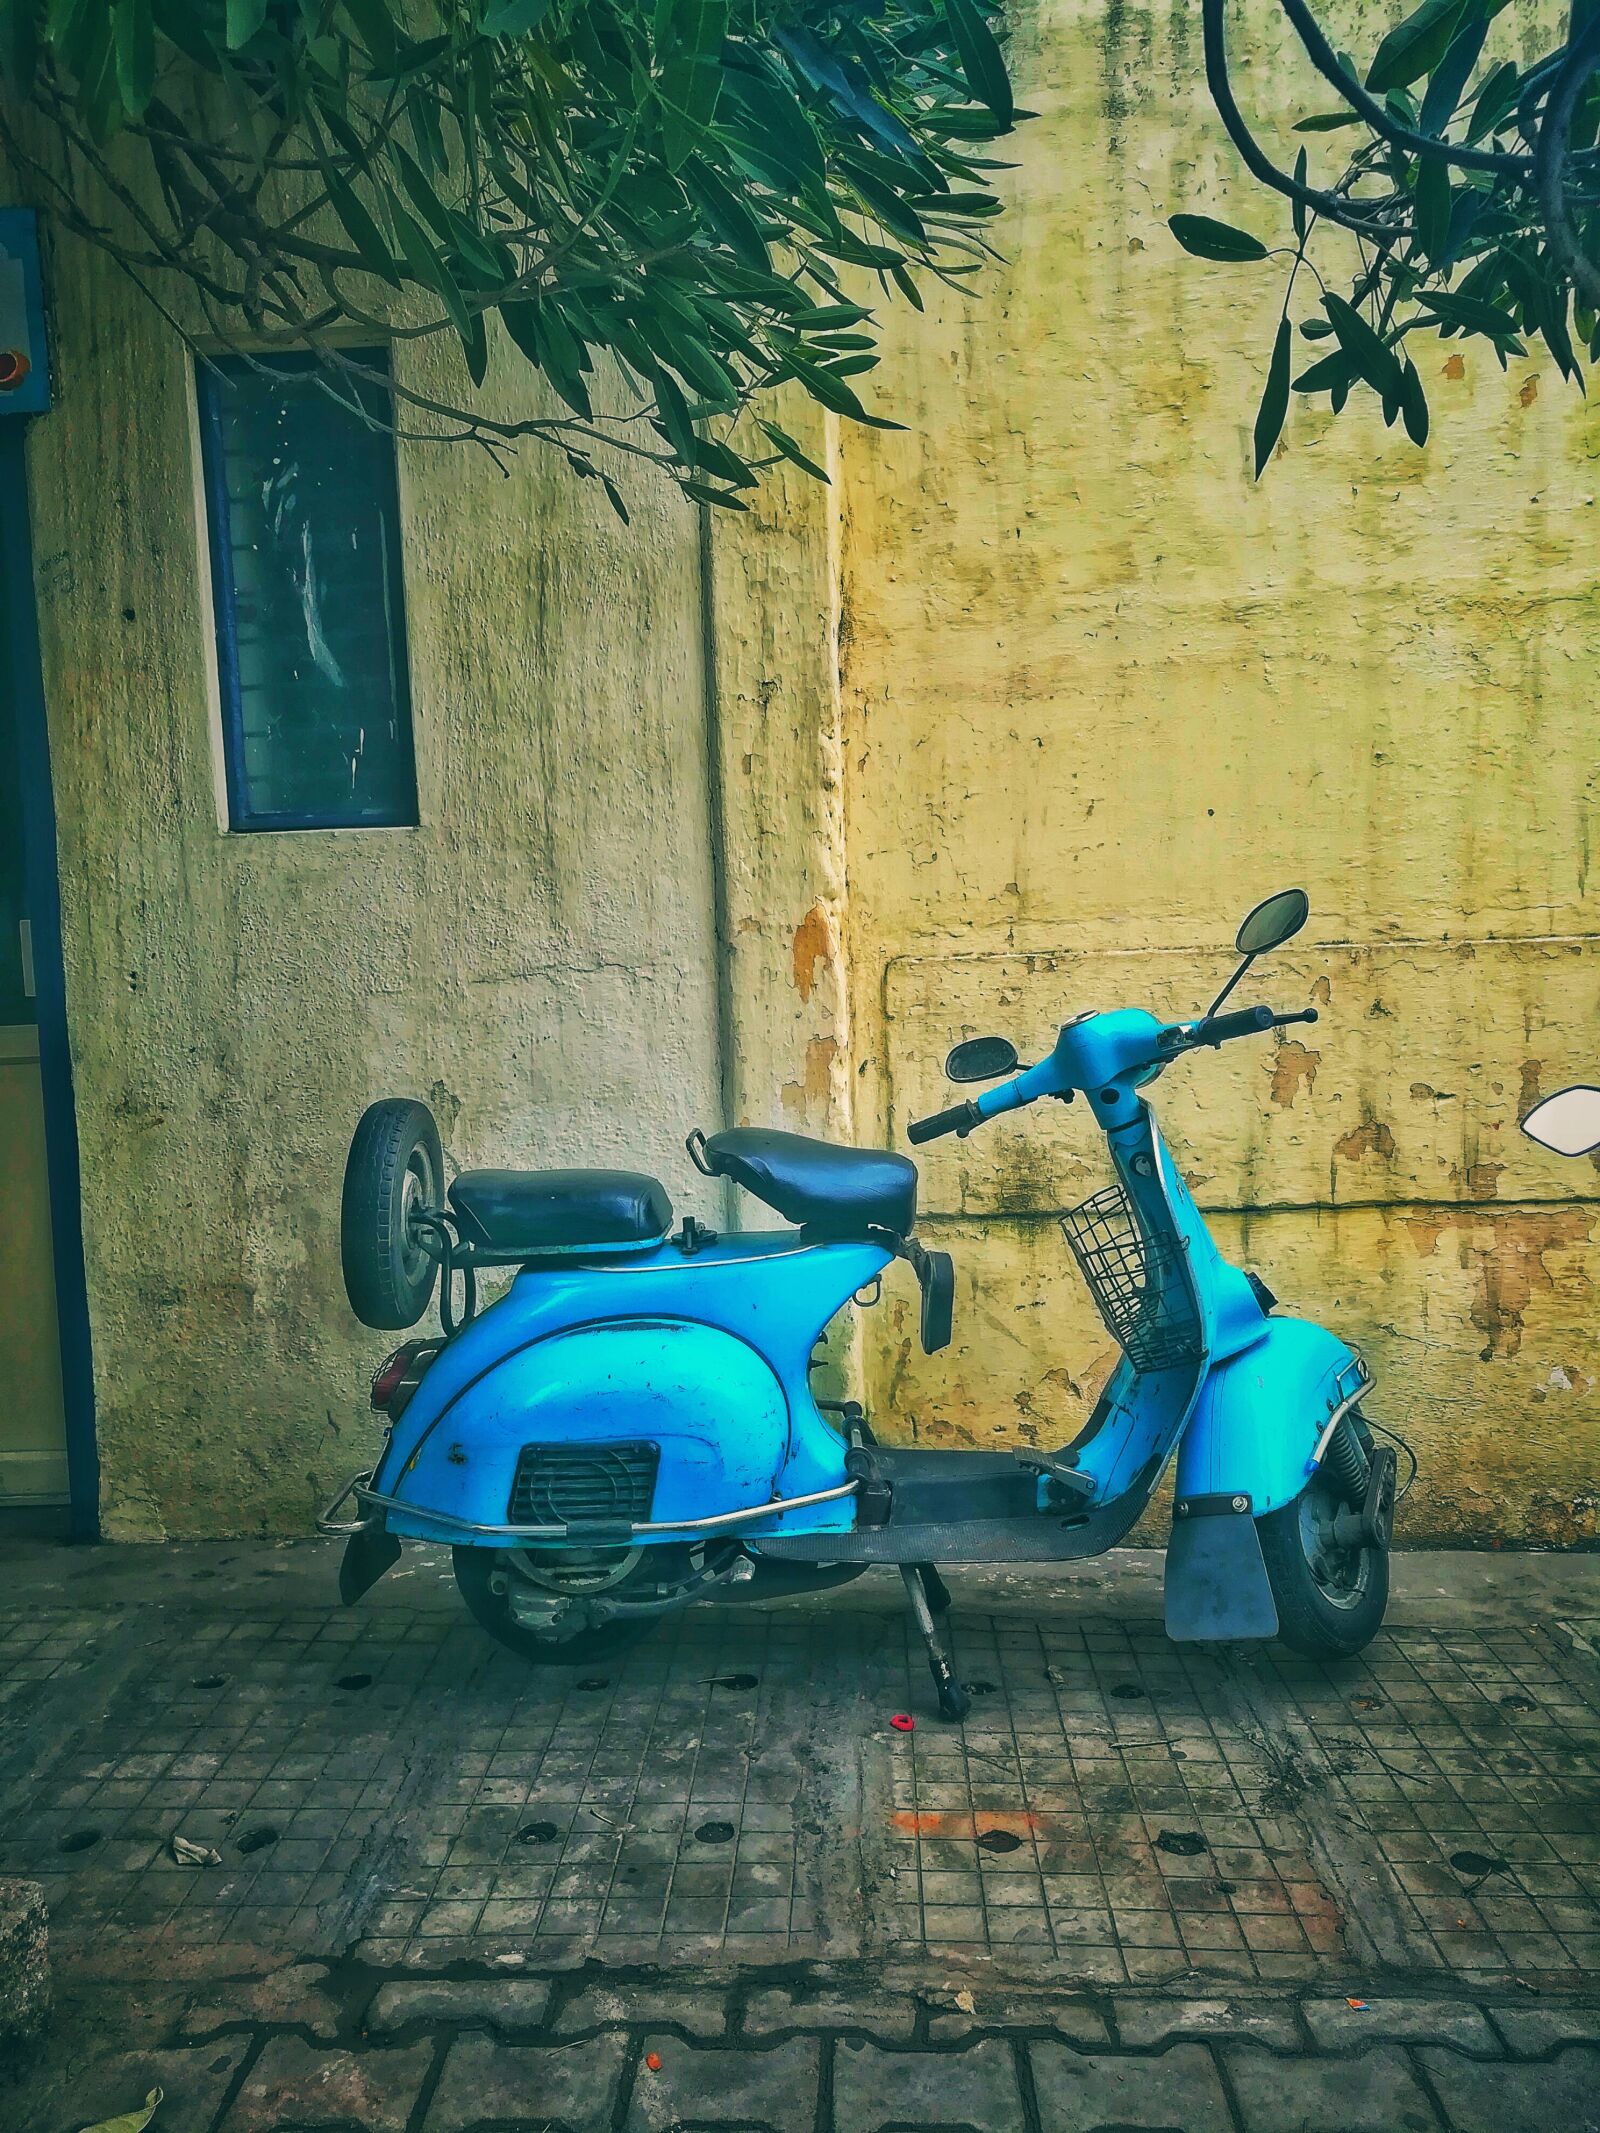 HUAWEI honor 6x sample photo. Teal, motor, scooter, on photography